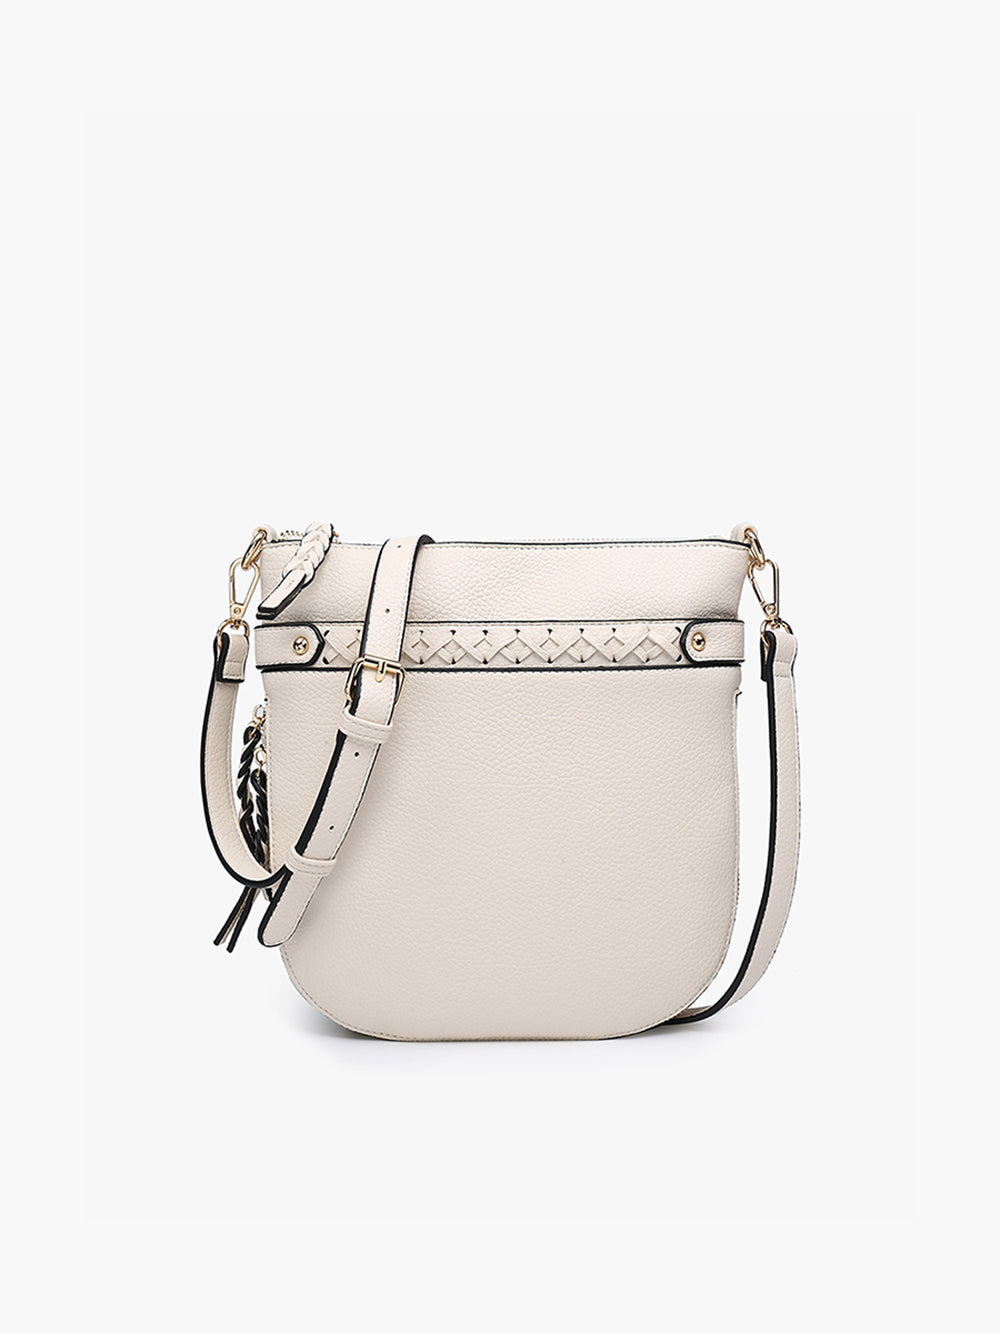 jen & co esther whipstitch round crossbody bag in ivory vegan leather